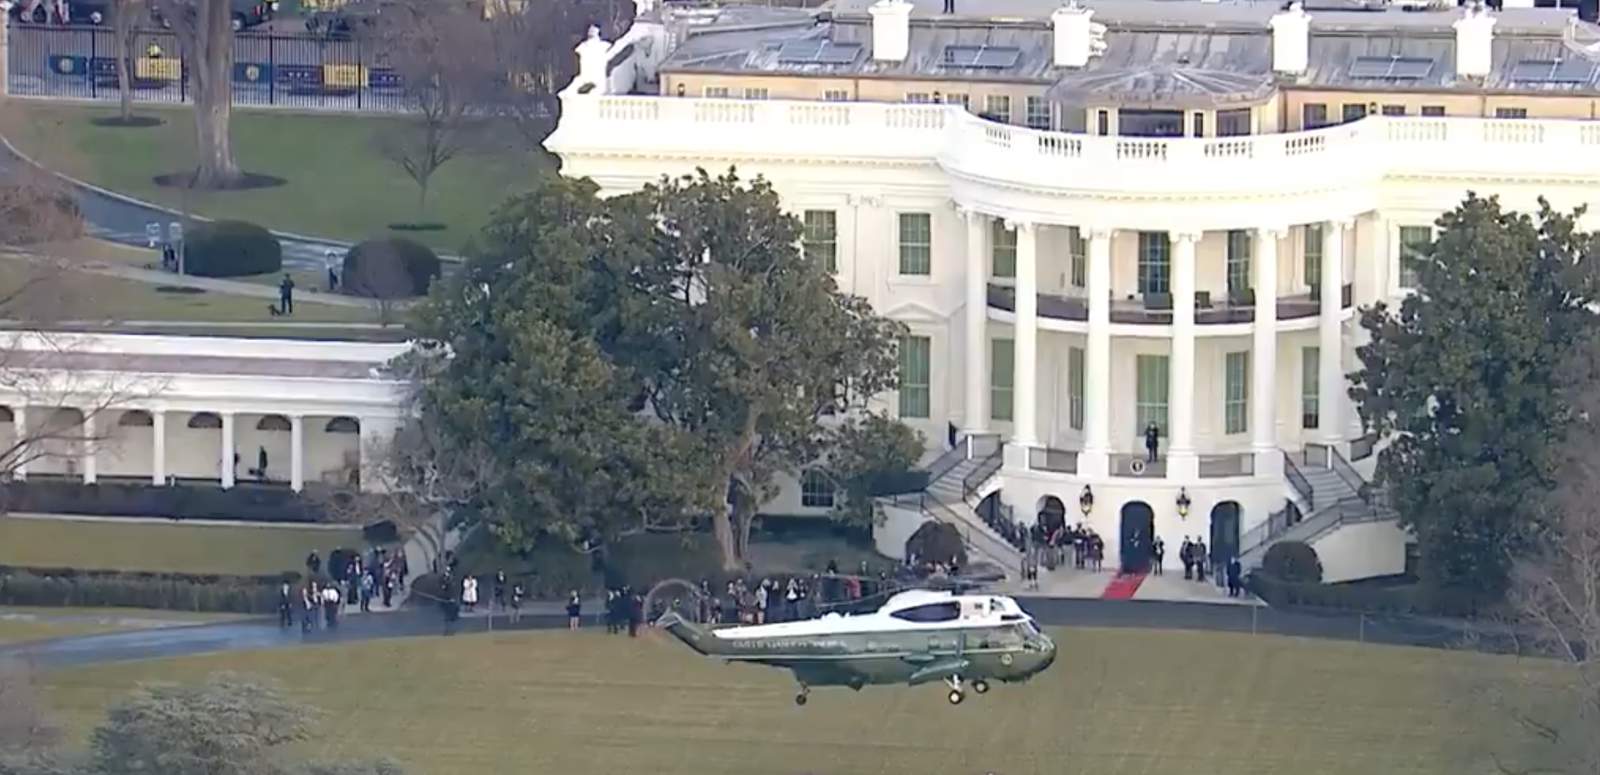 VIDEO: Trump leaves White House for final time as president